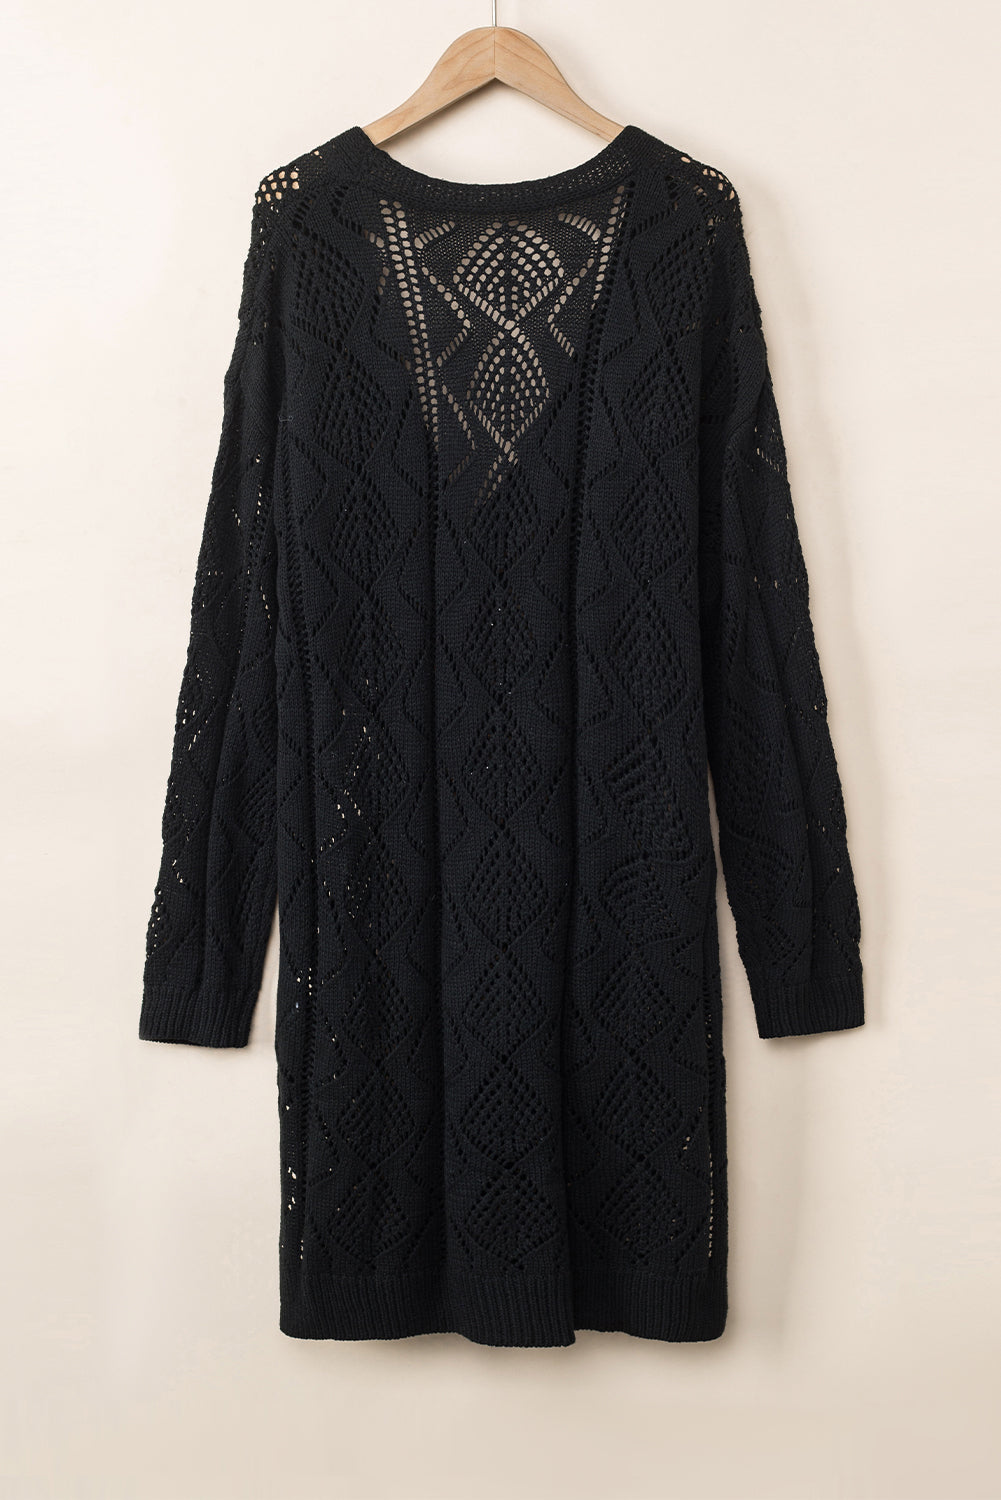 Orange Hollow-out Openwork Knit Cardigan